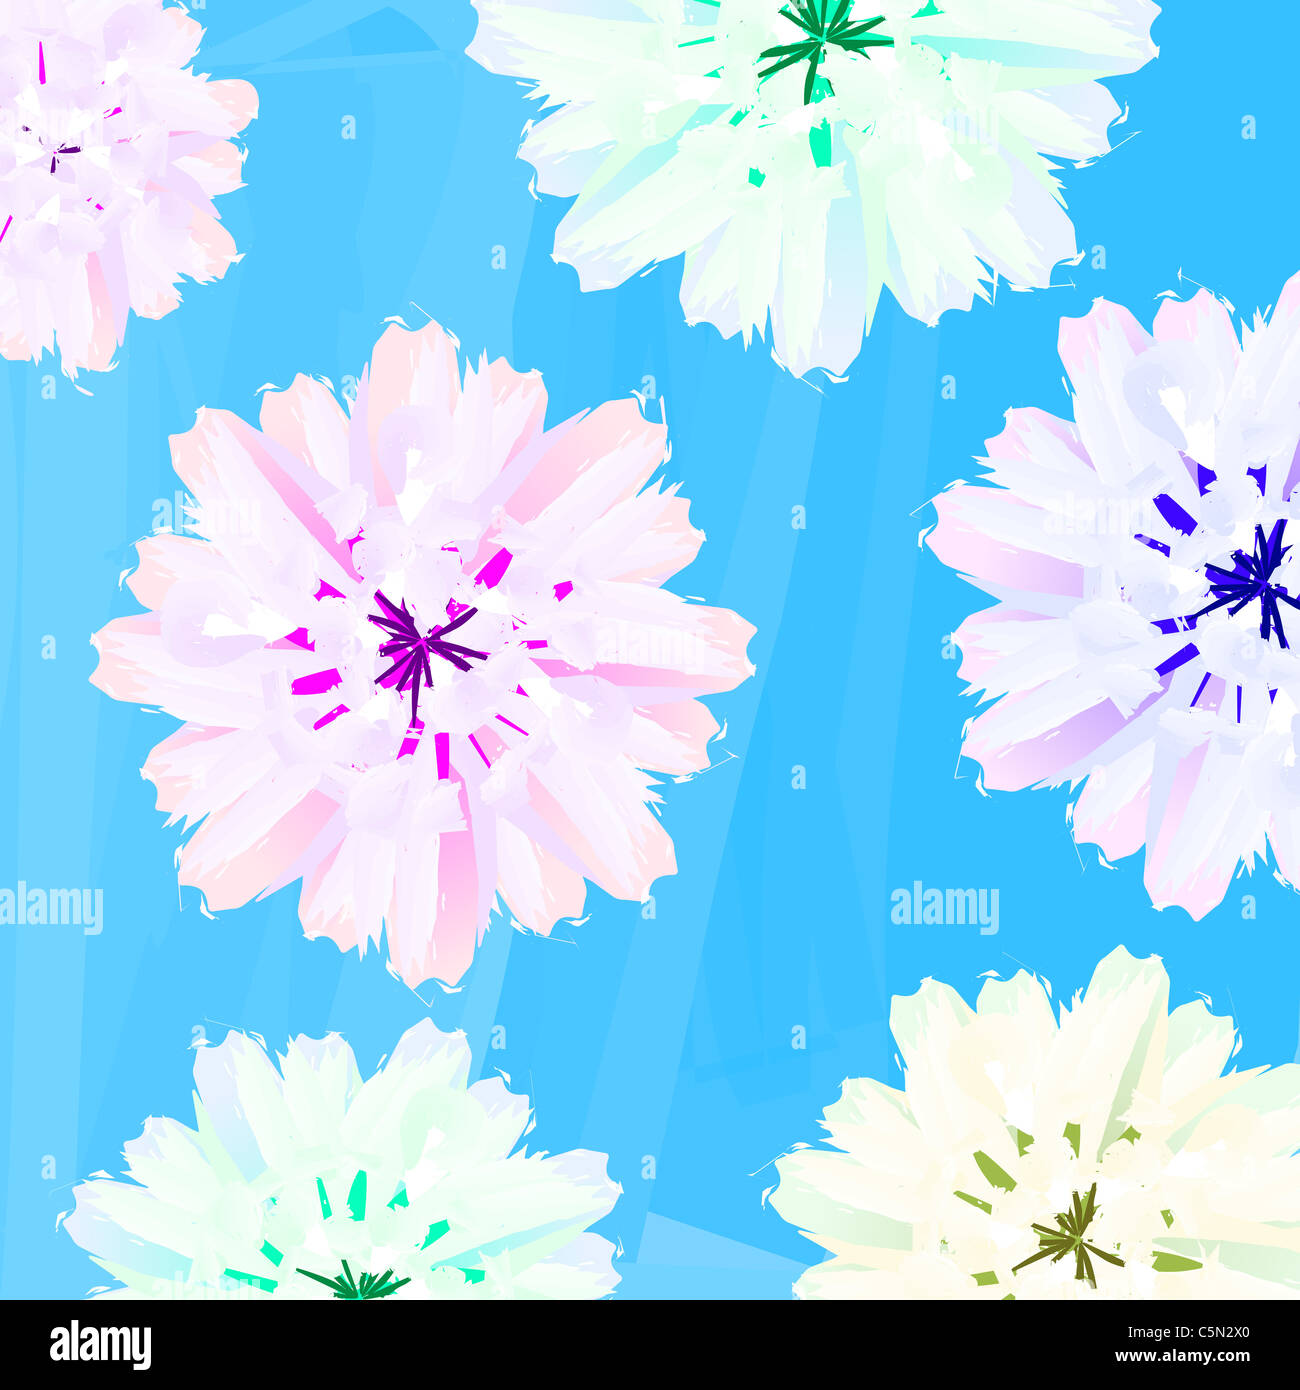 Pastel floral background, abstract art Stock Photo